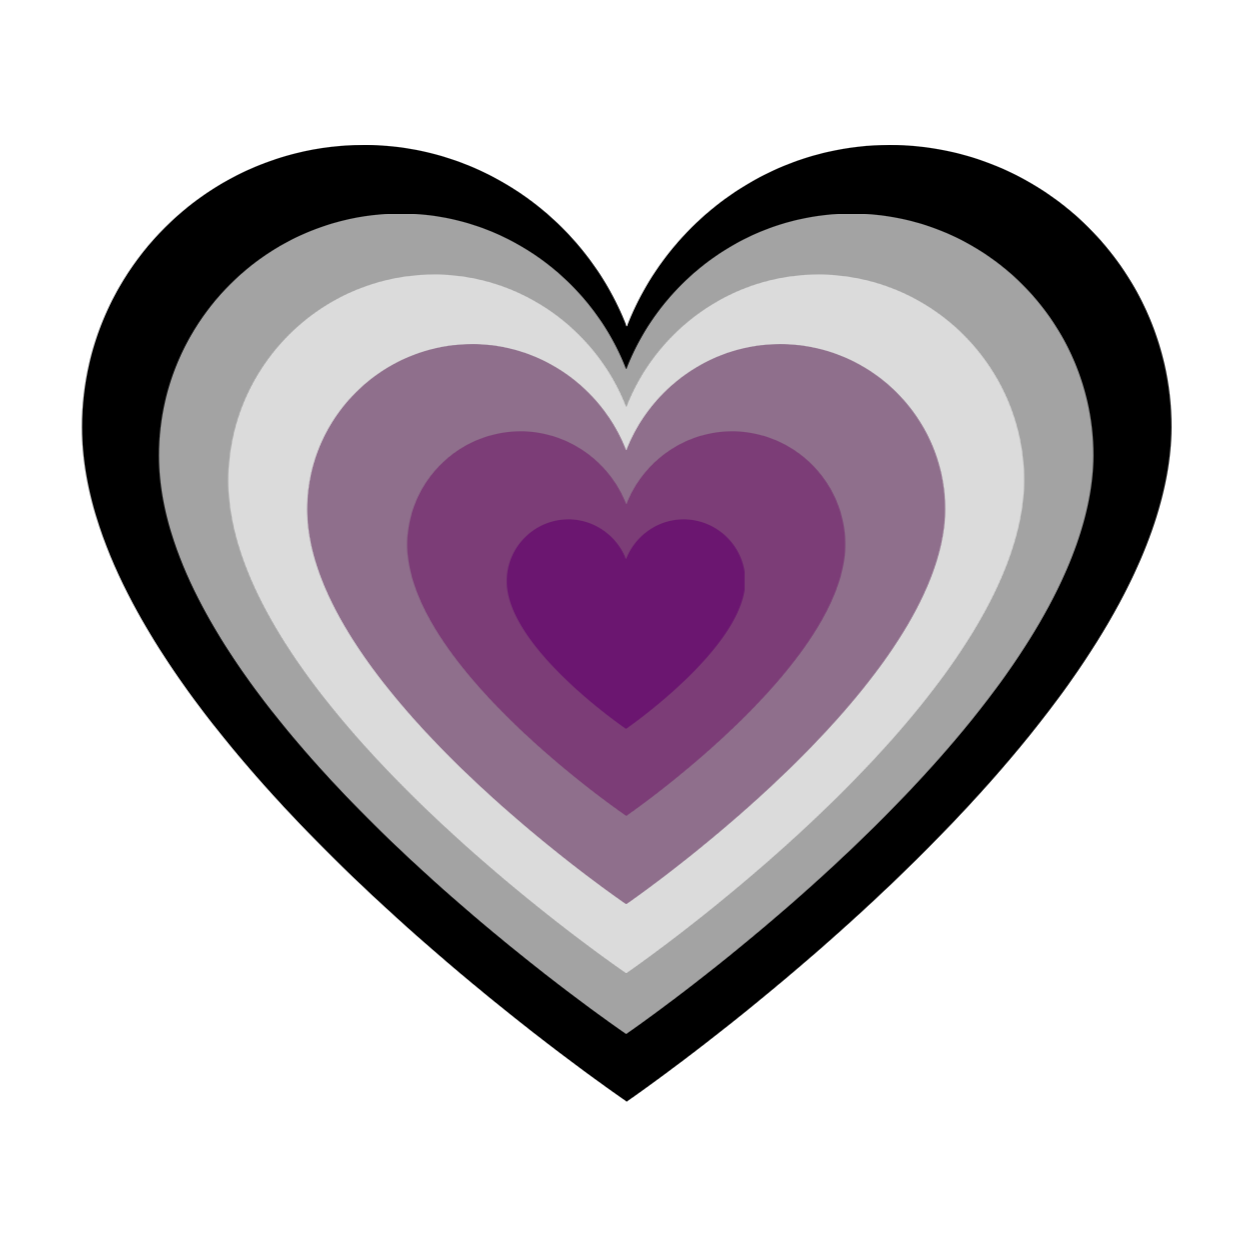 heart sticker featuring the colors of the asexual pride flag